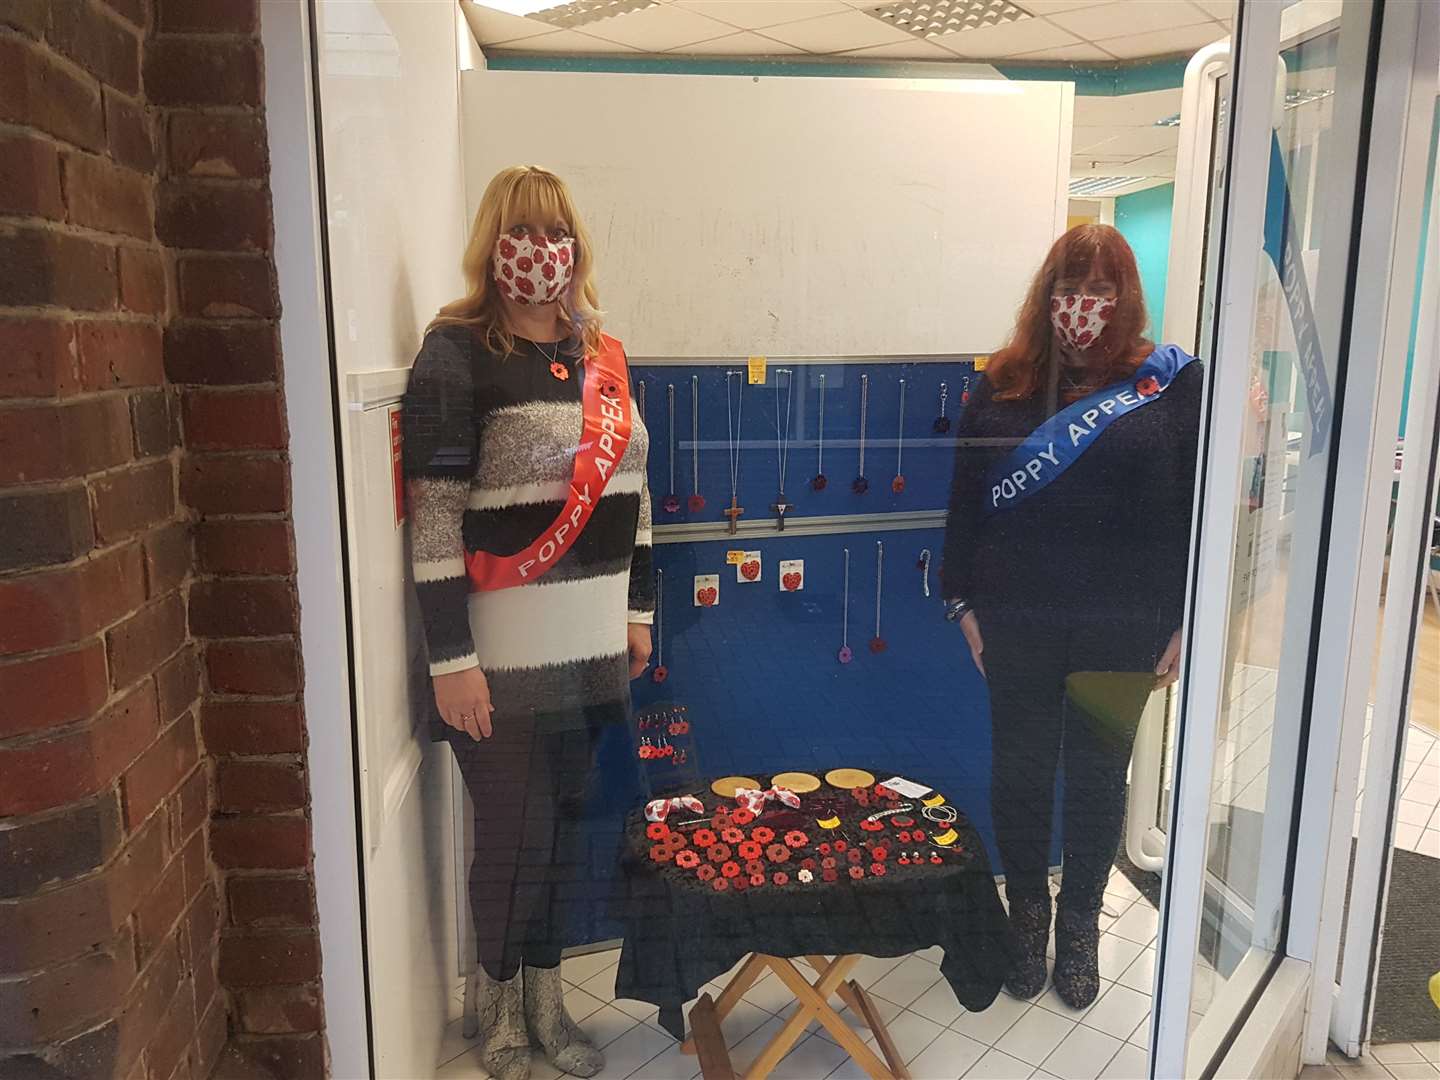 Tracey Golding and Lynn Taylor are avid supporters of the Royal British Legion, donating their time and handmade items to the cause